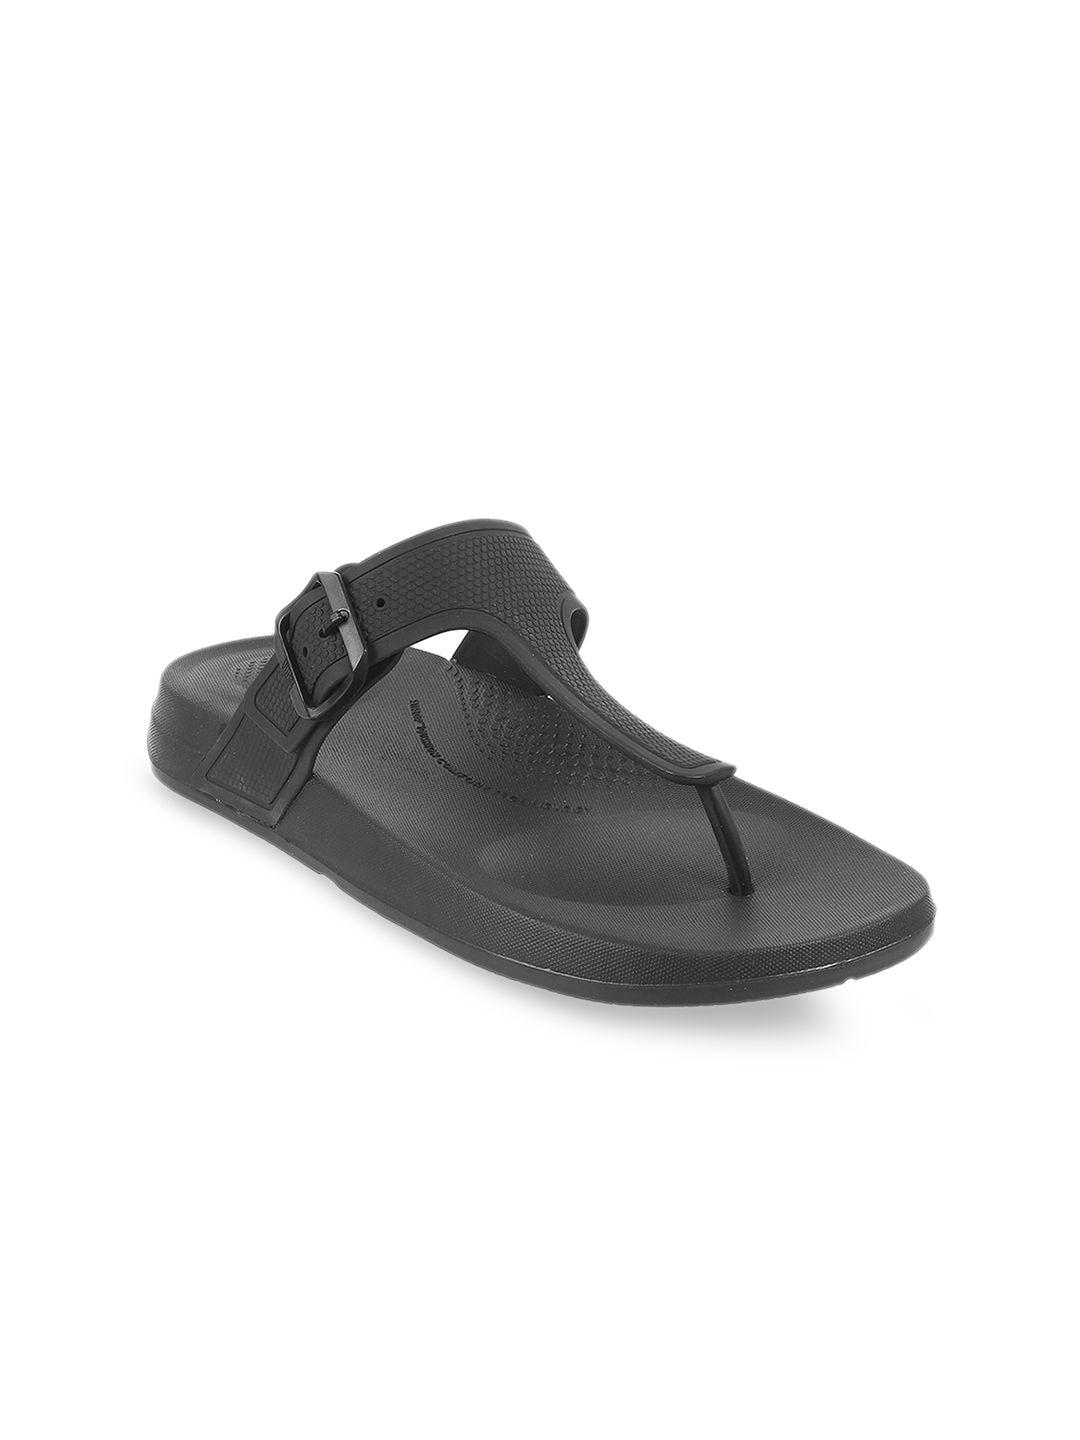 fitflop-women-open-toe-t-strap-flats-with-buckles